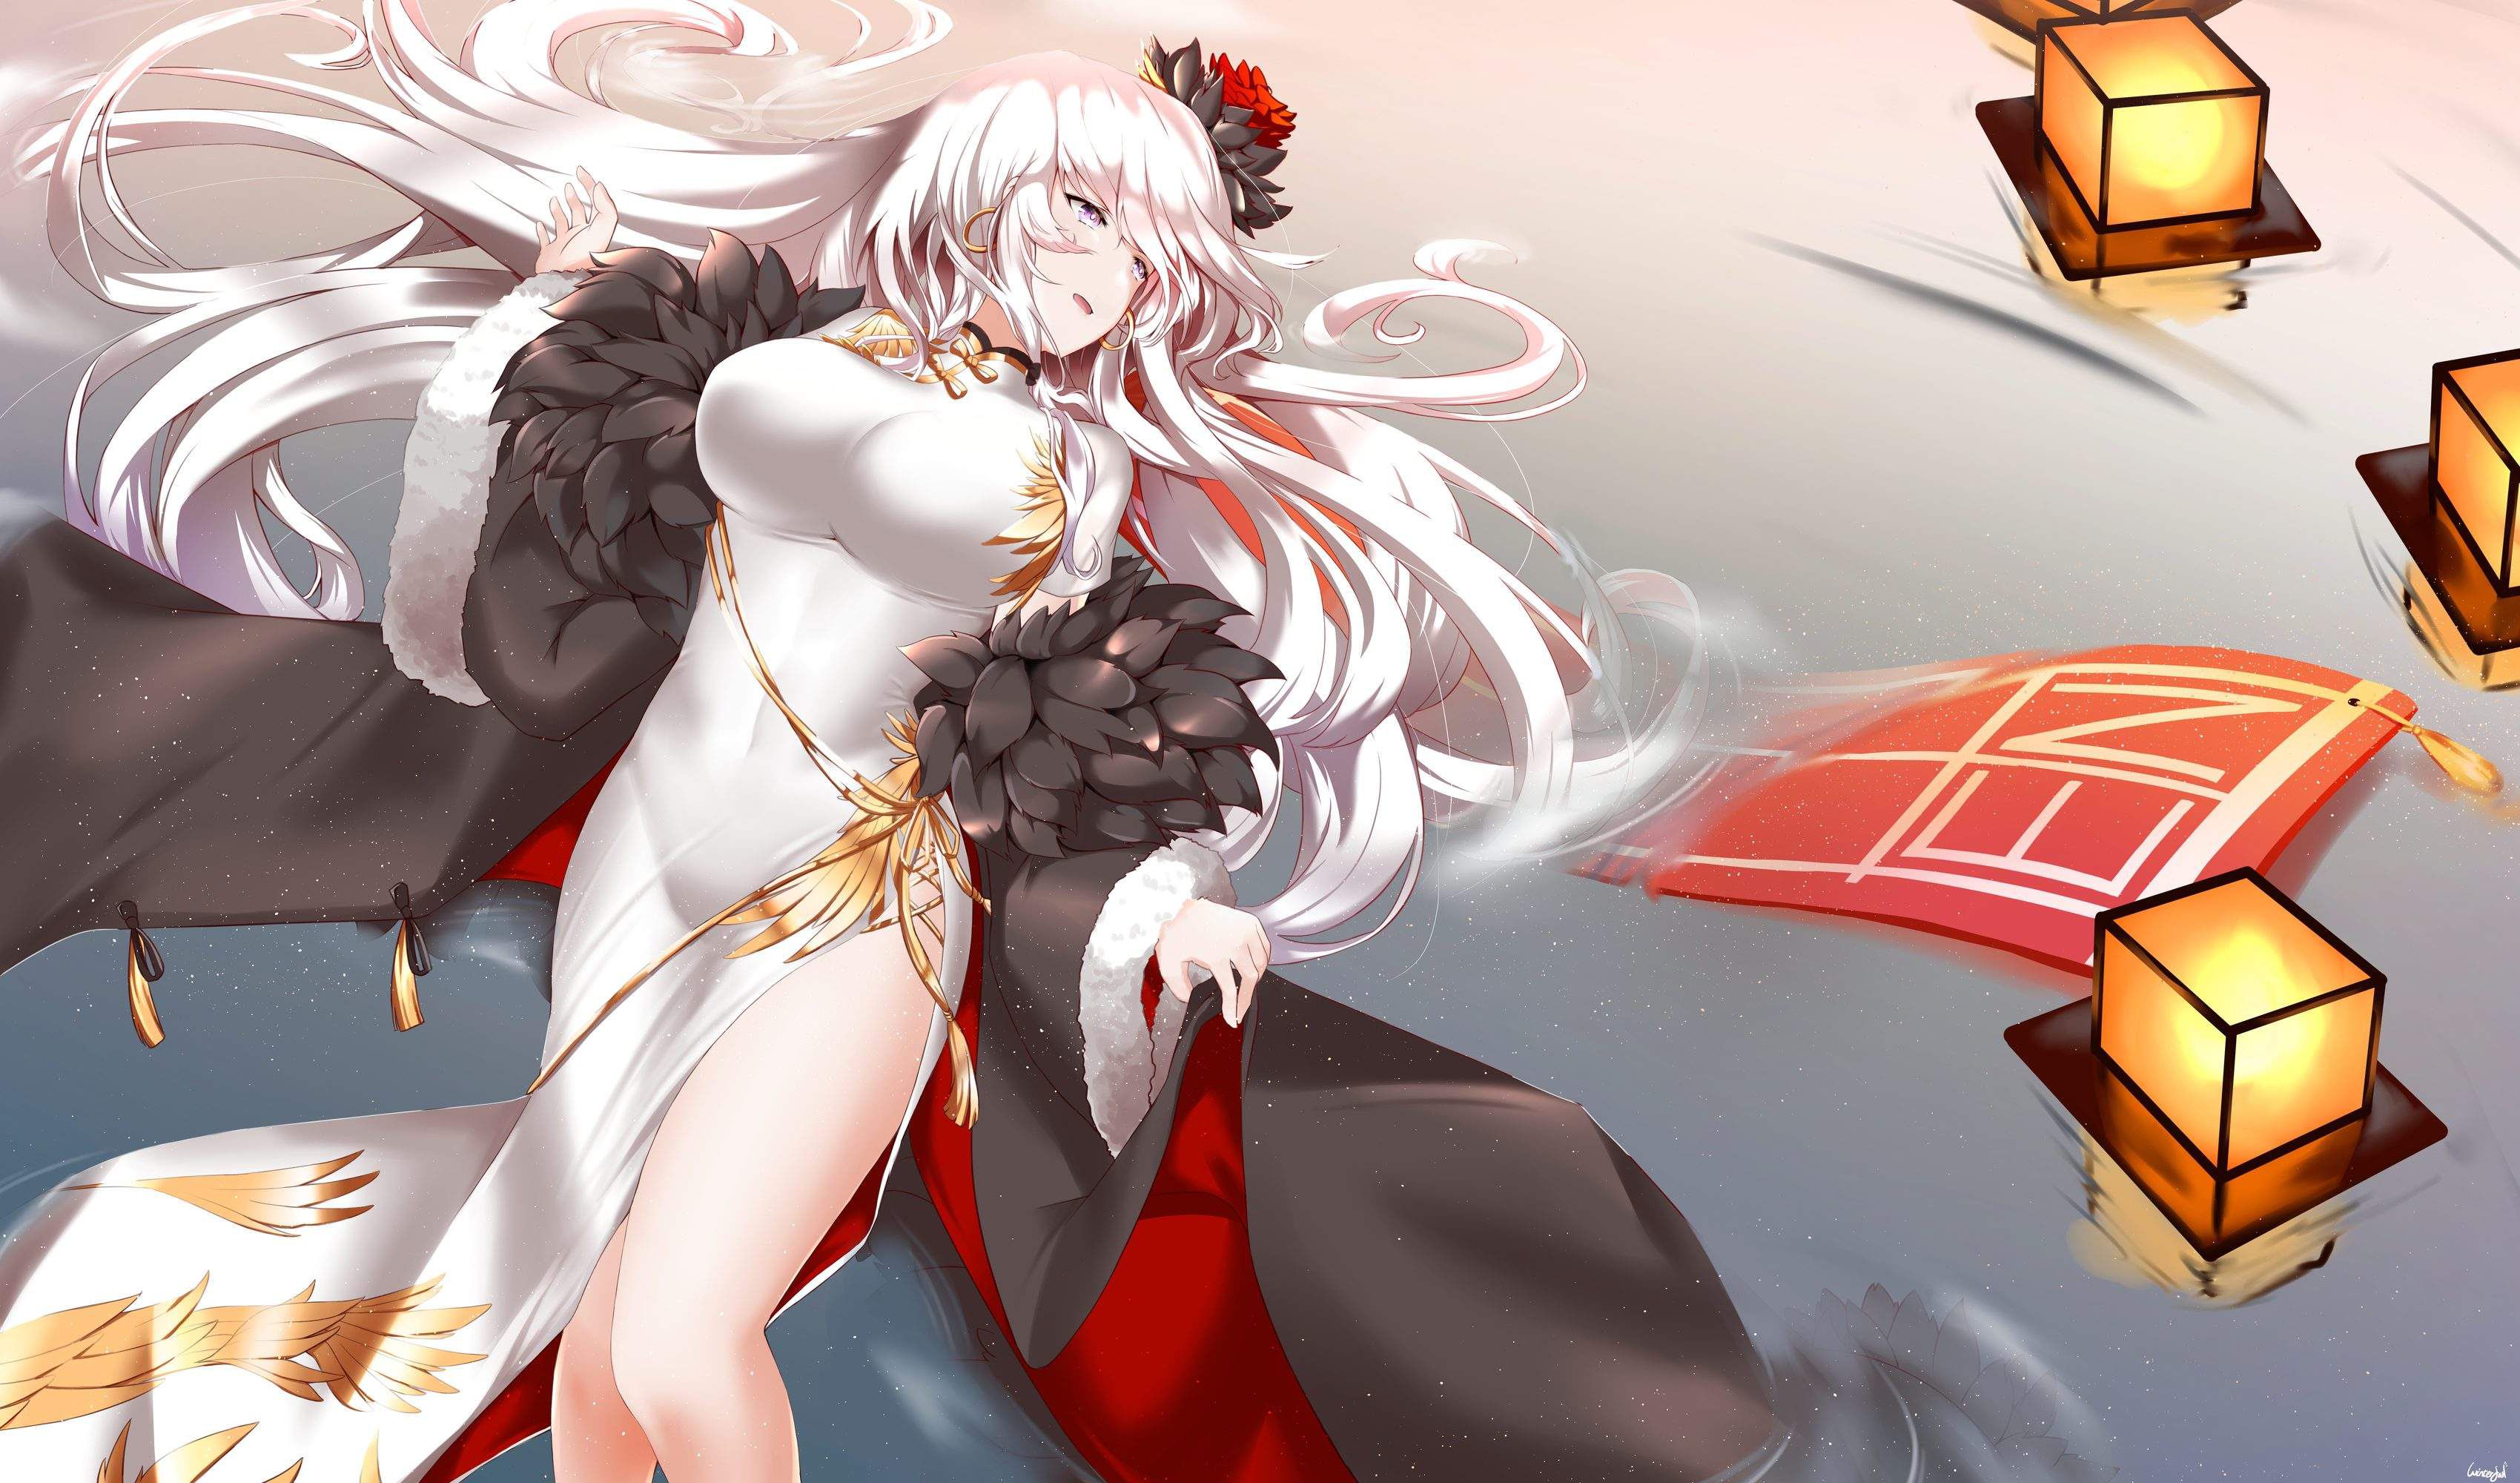 Gather people who want to see the erotic images of Azur Lane! 9